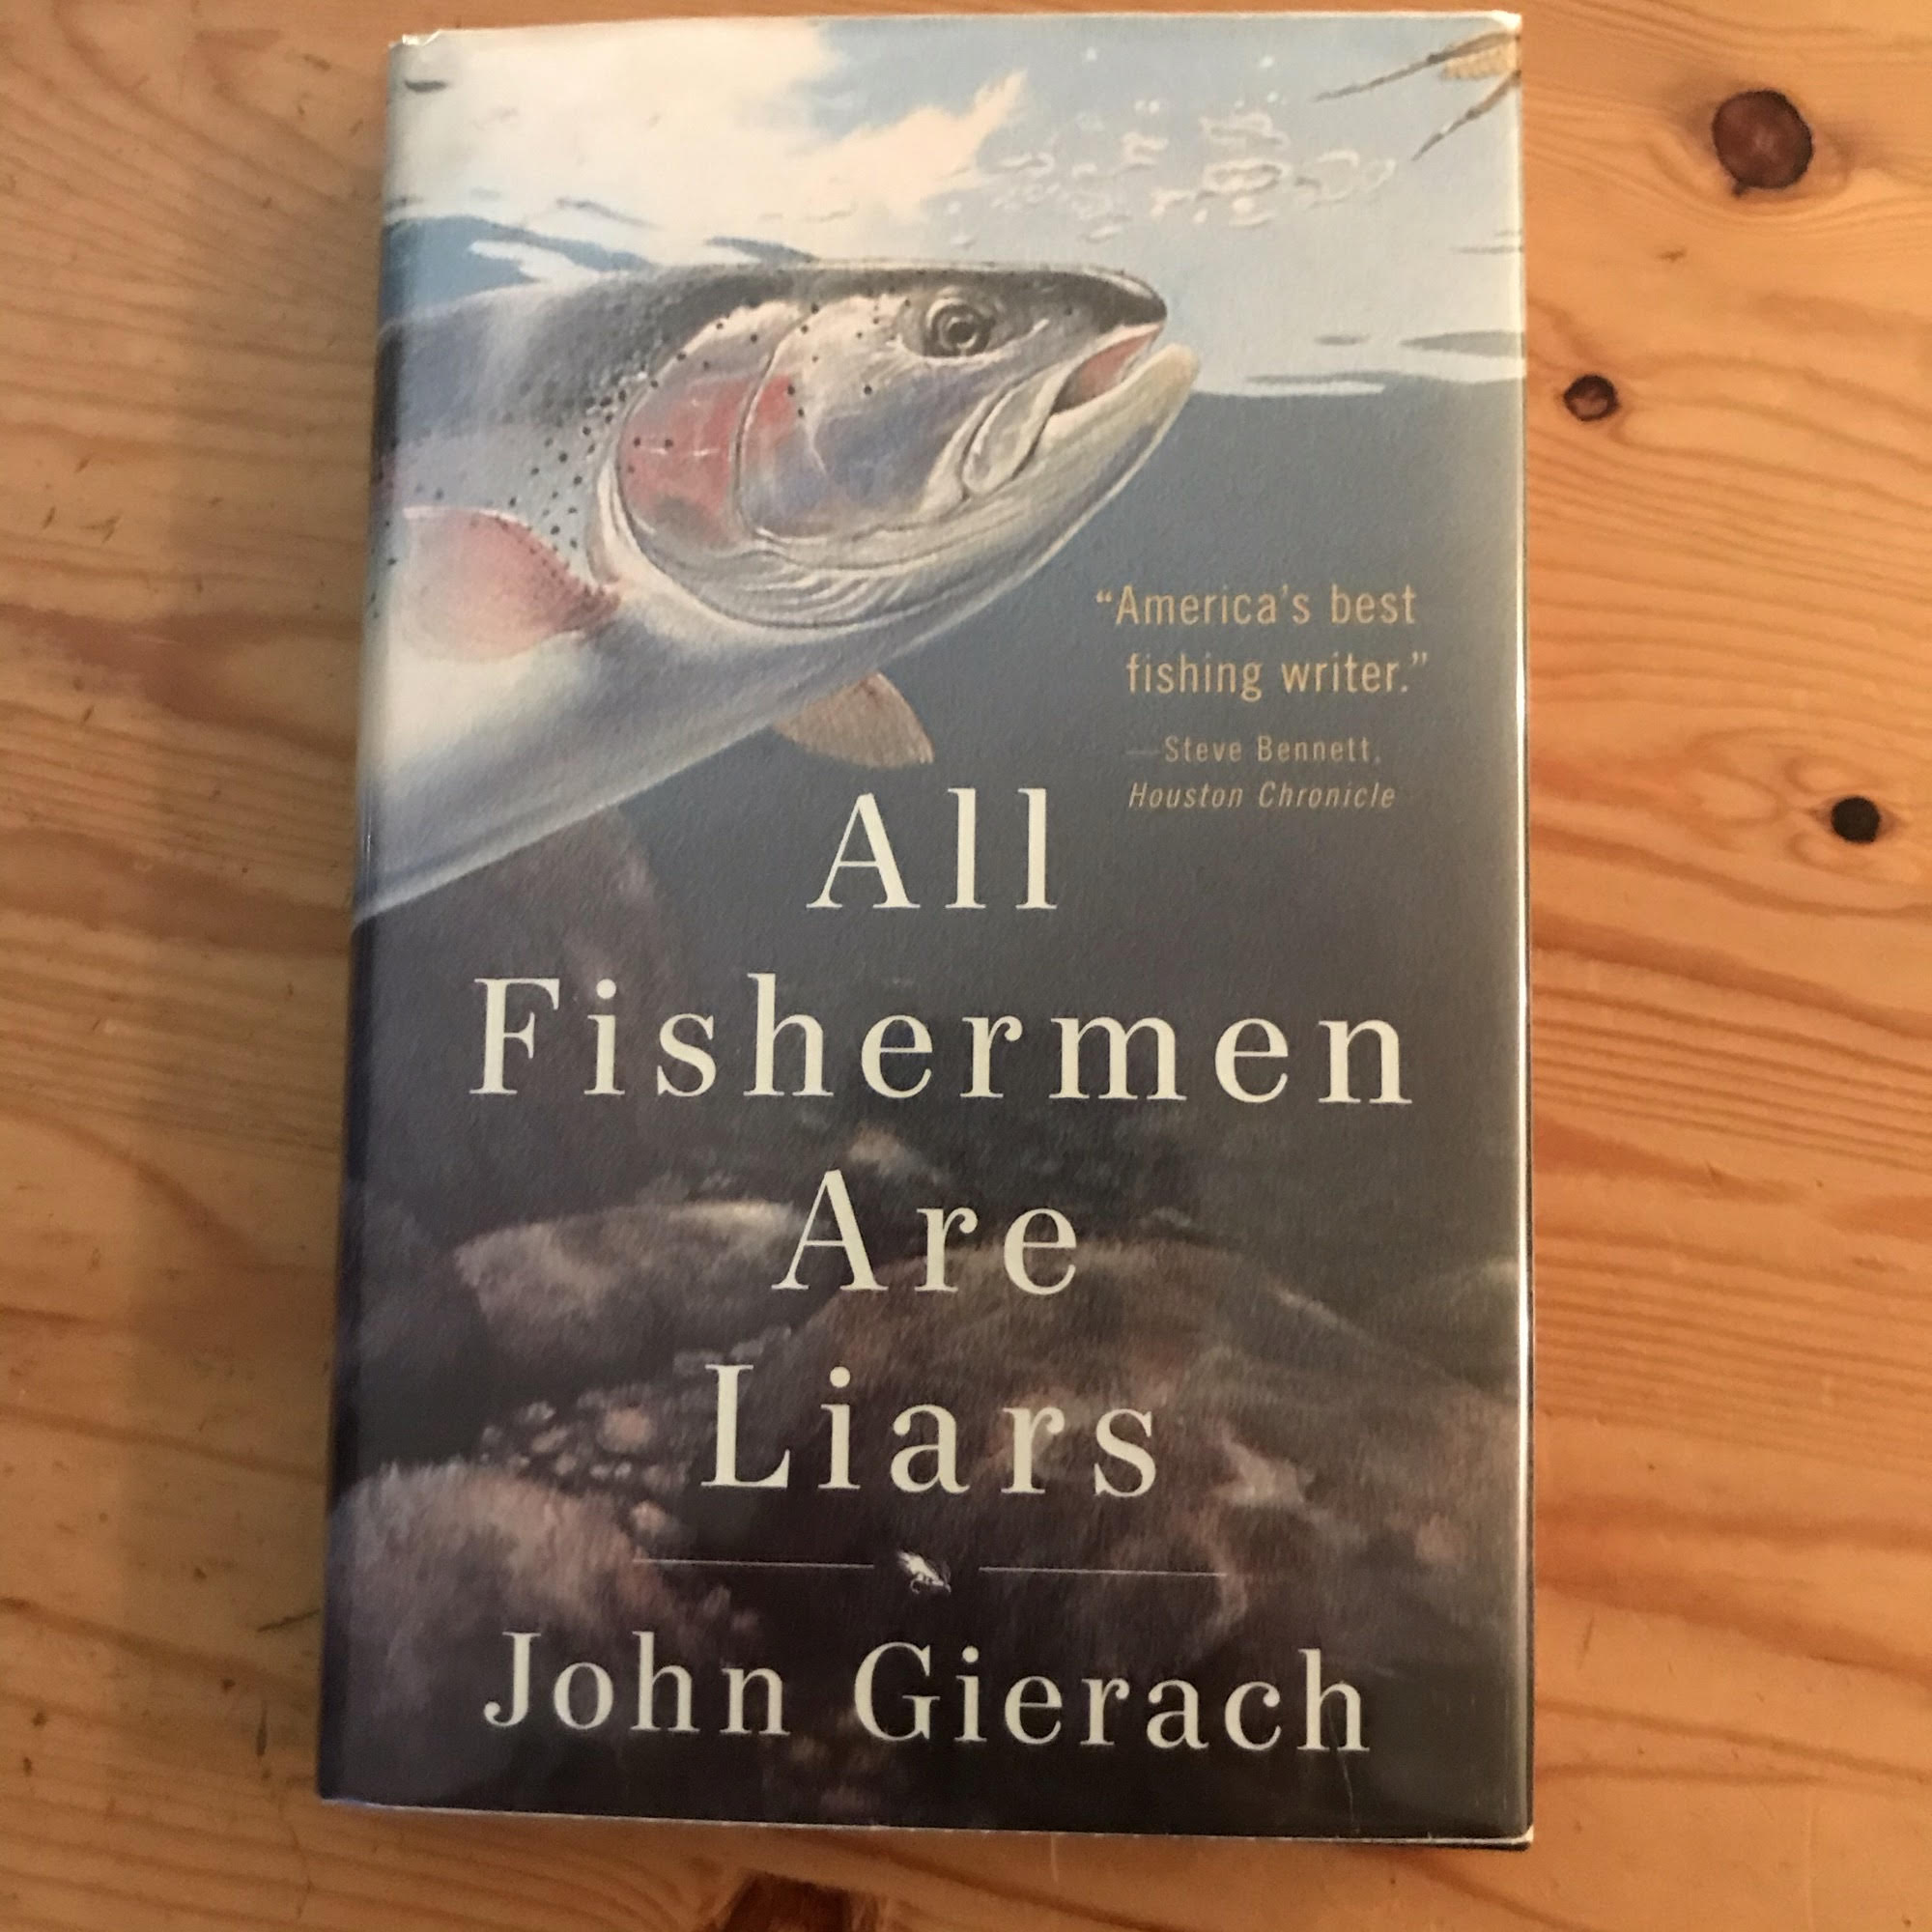 All Fishermen are Liars by John Gierach – Barney's Books